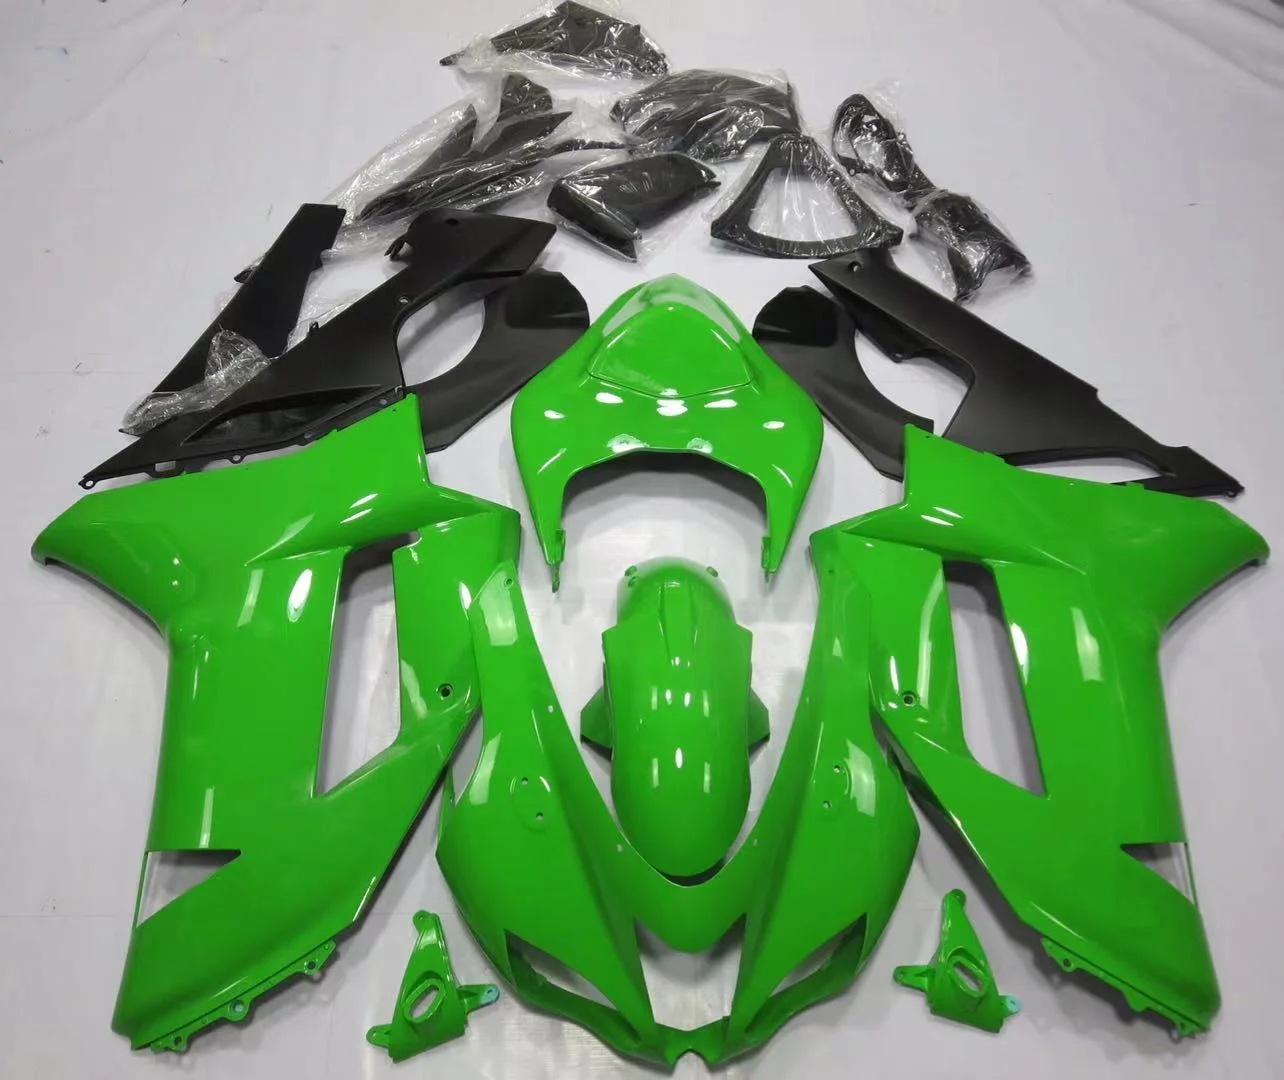 

2021 WHSC Cowlings For KAWASAKI 6R 2007-2008 ABS Plastic Fairing Kit Green, Pictures shown